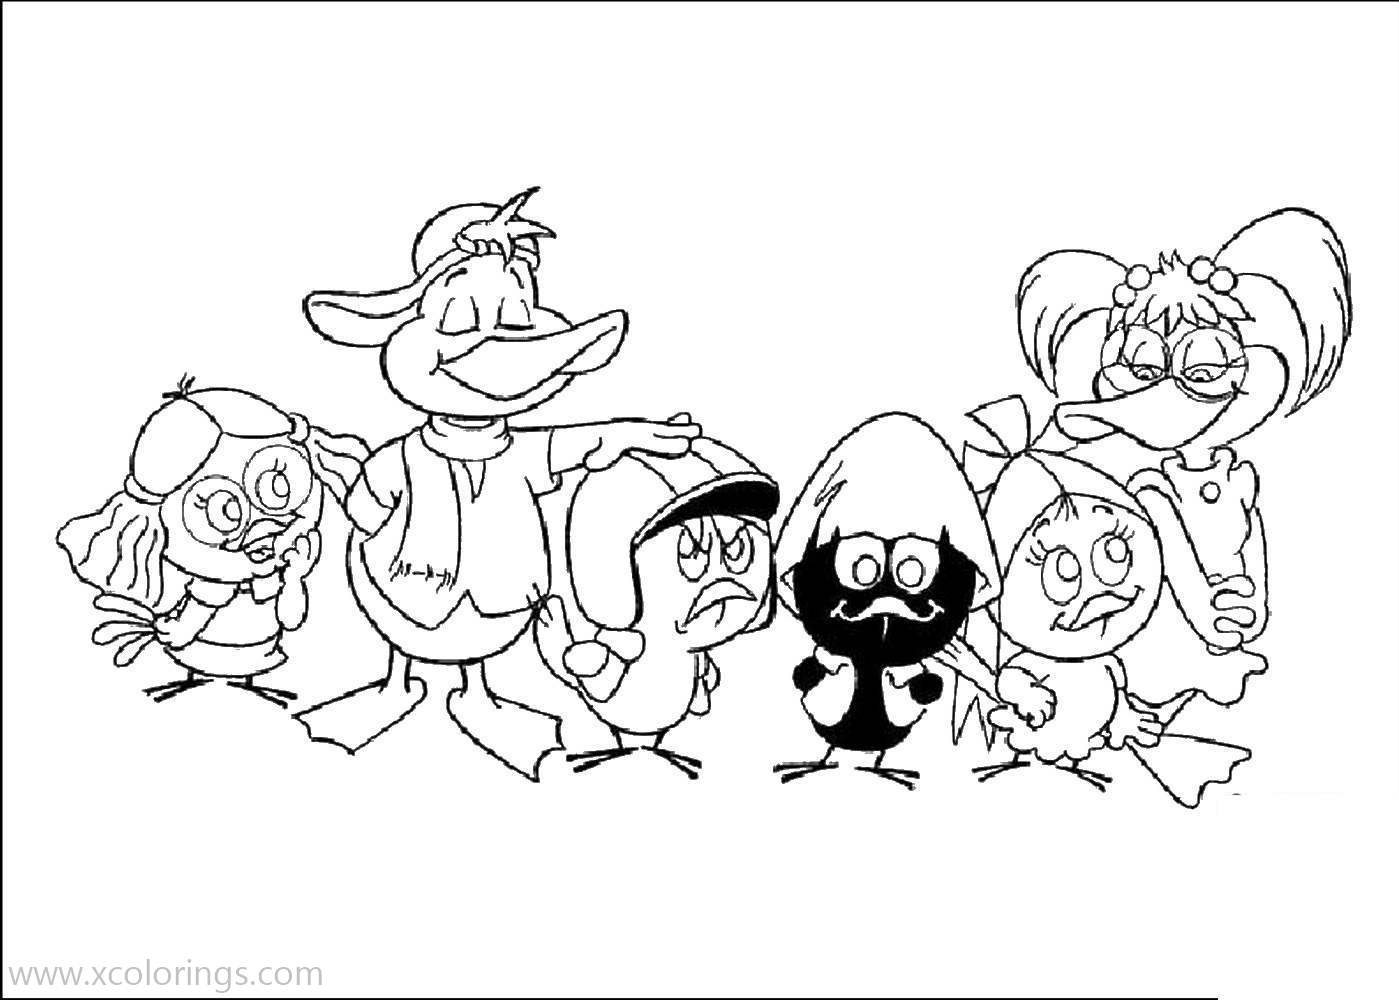 Free Calimero Coloring Pages Characters printable